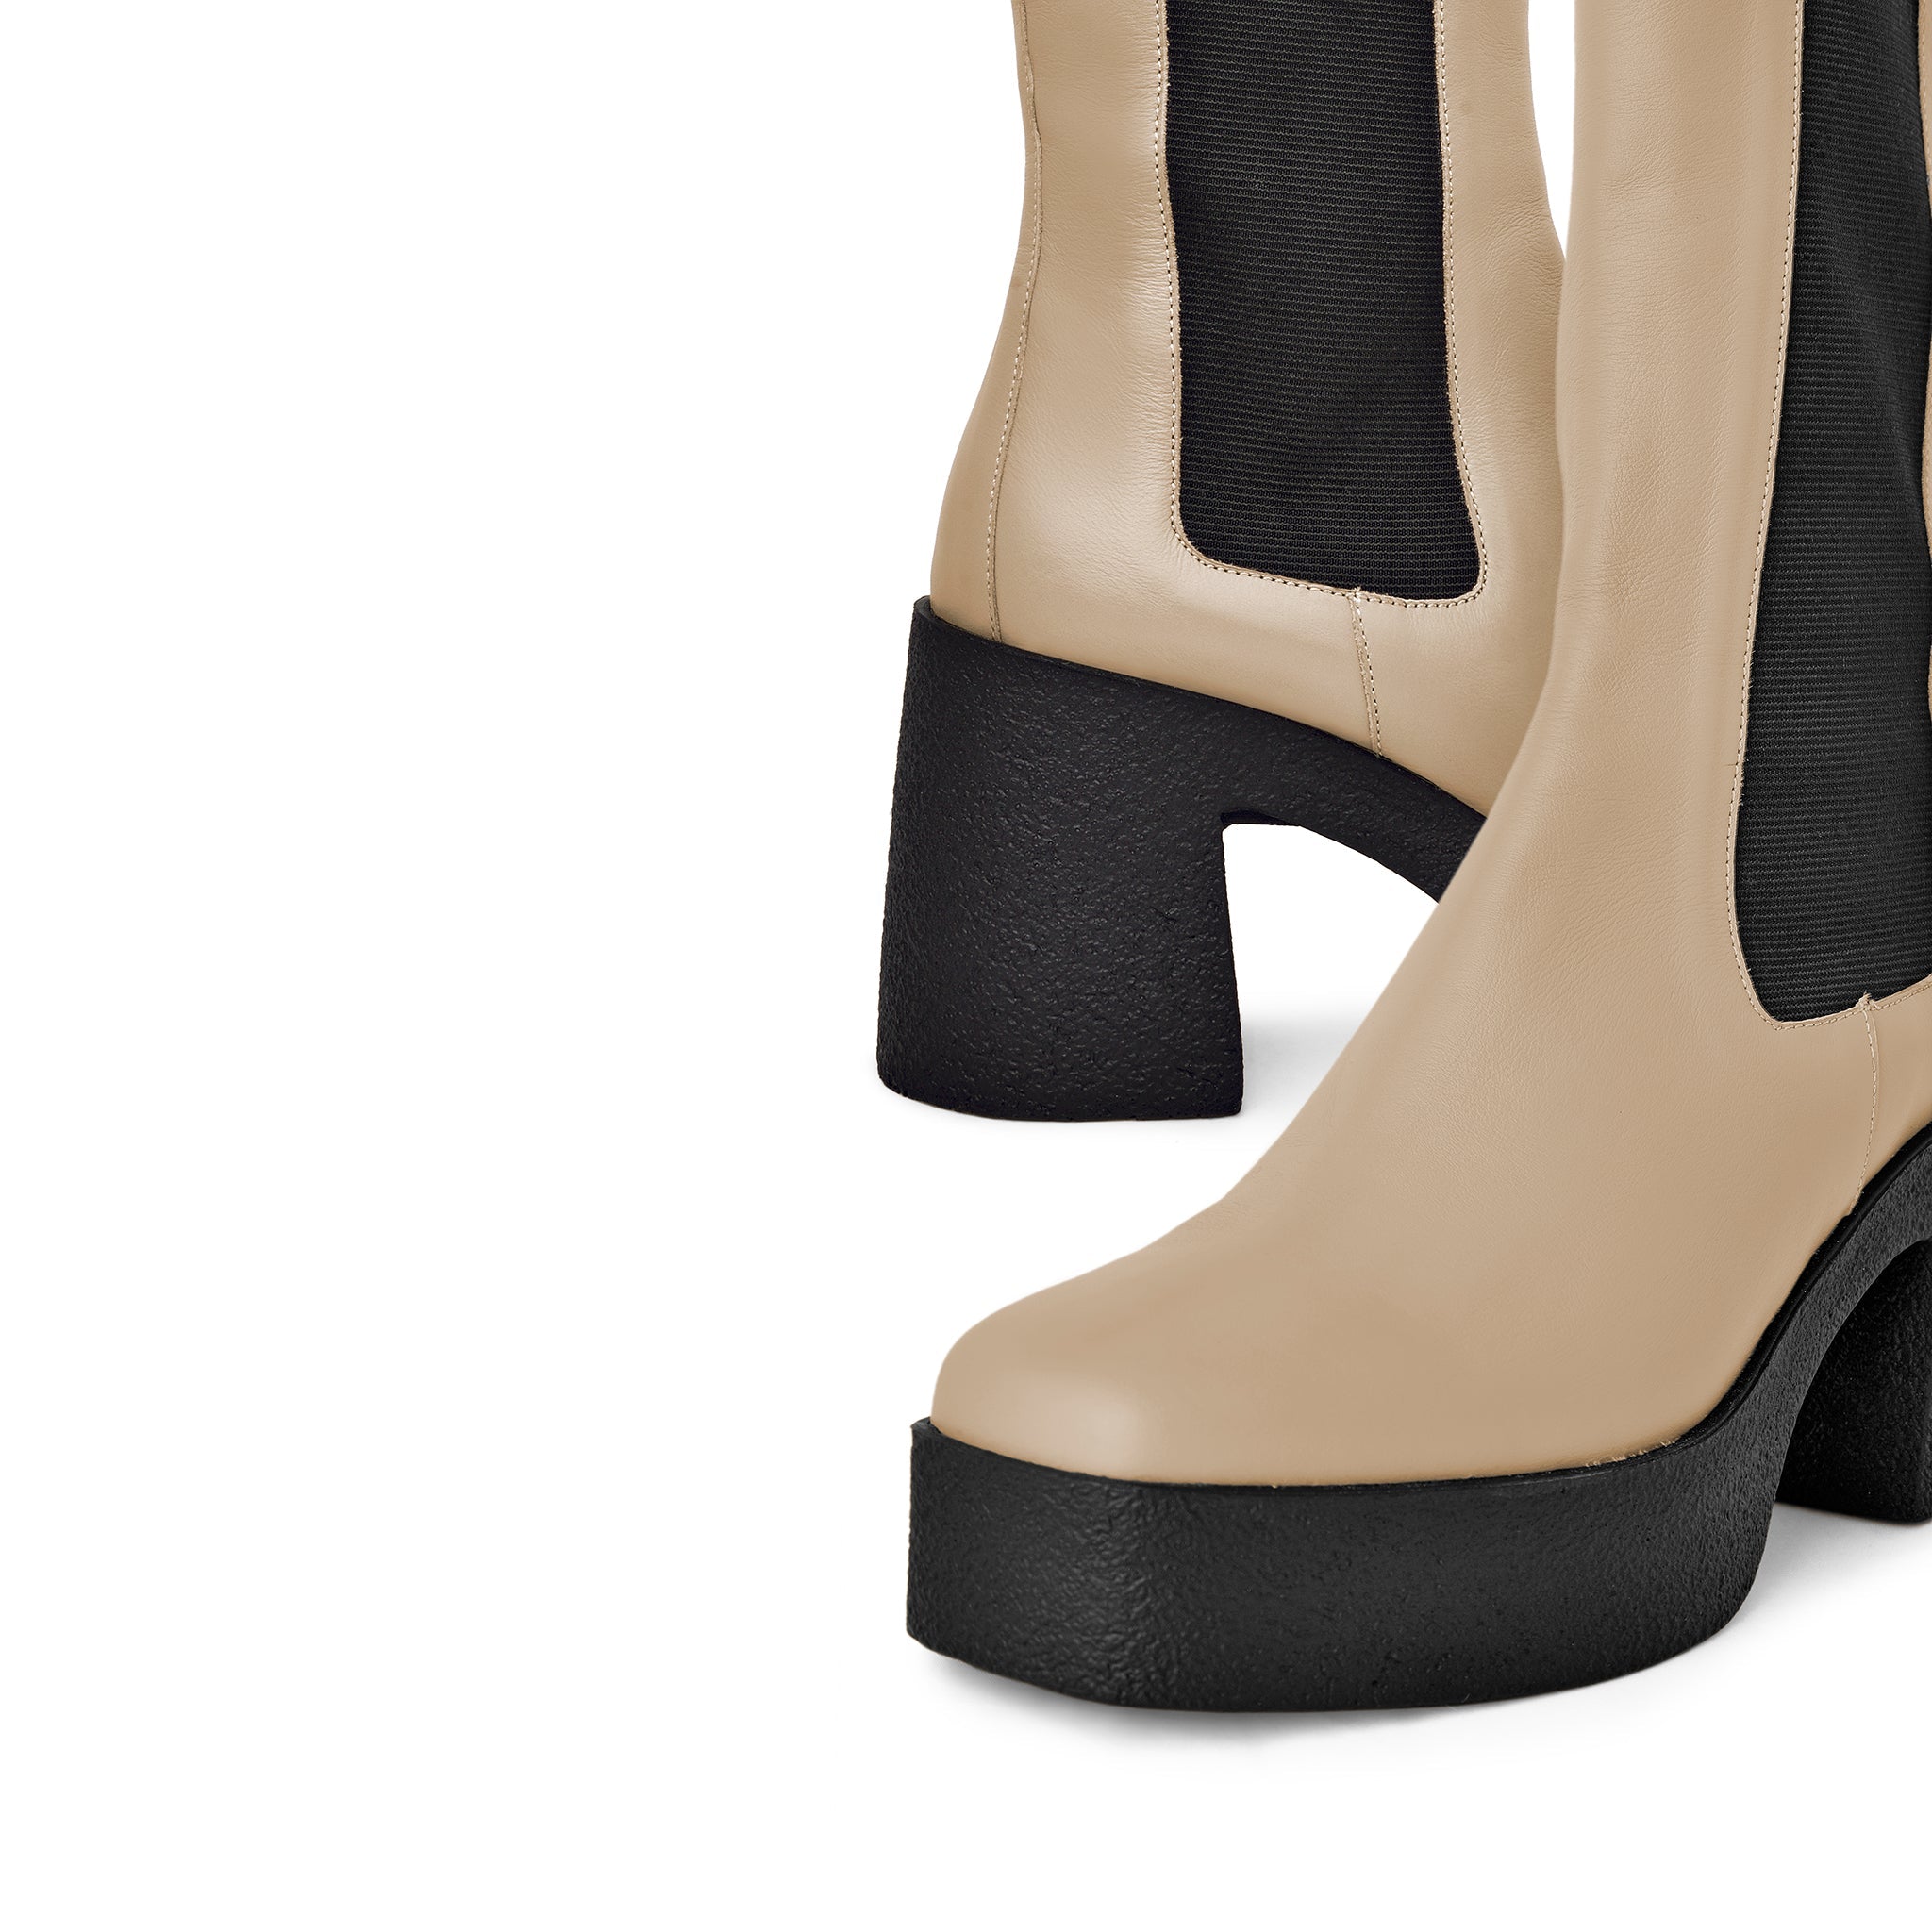 Momoko Taupe Knee-High Leather Chelsea Boots 20077-05-02 -13